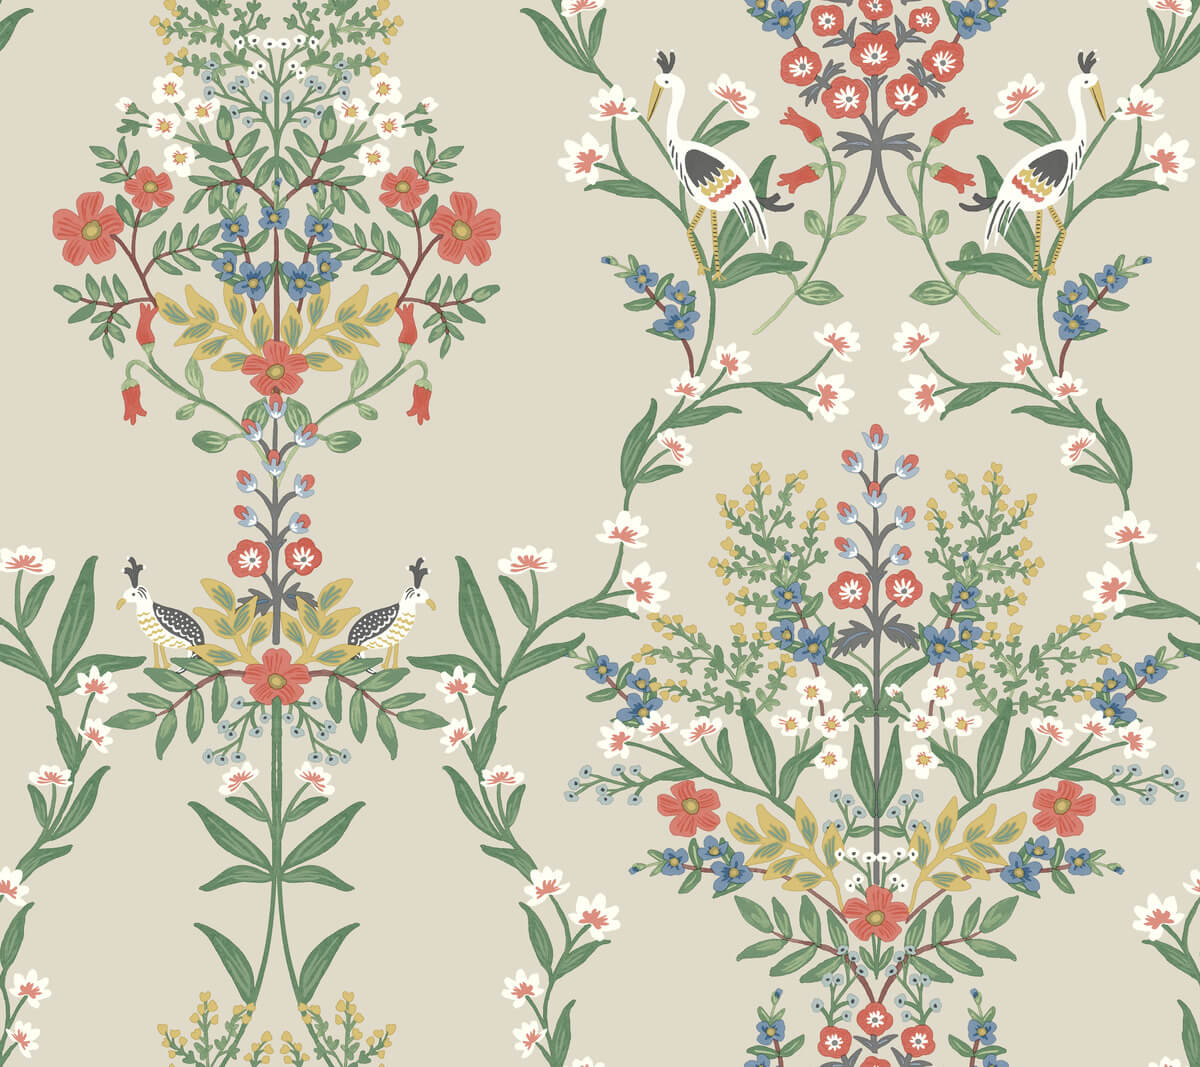 Rifle Paper Co. Second Edition Luxembourg Wallpaper - SAMPLE